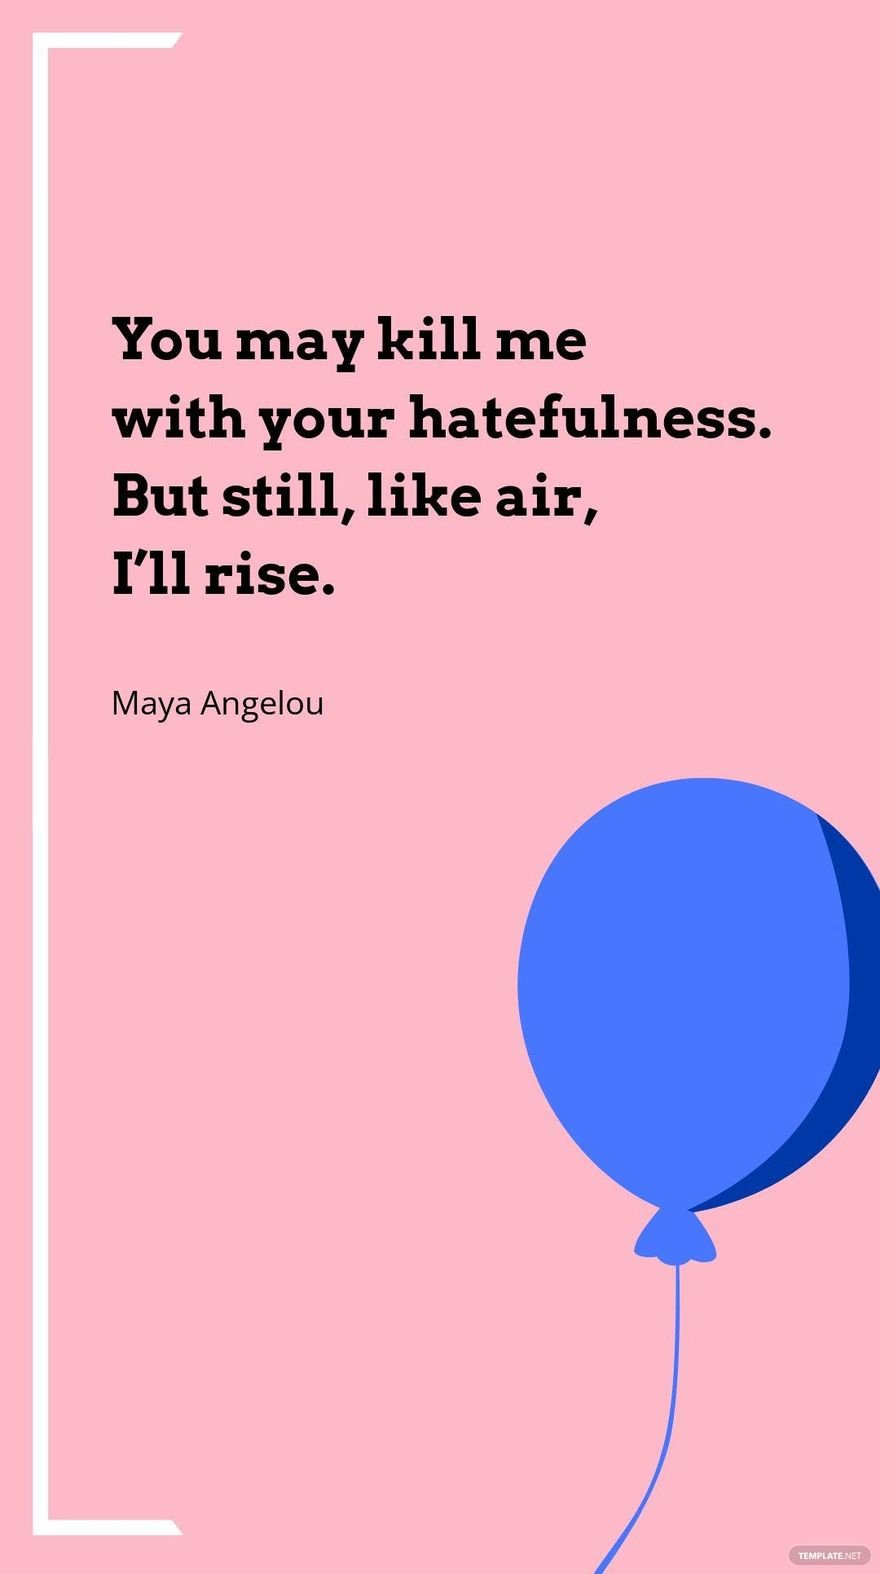 Free Maya Angelou - You may kill me with your hatefulness. But still, like air, I’ll rise. in JPG